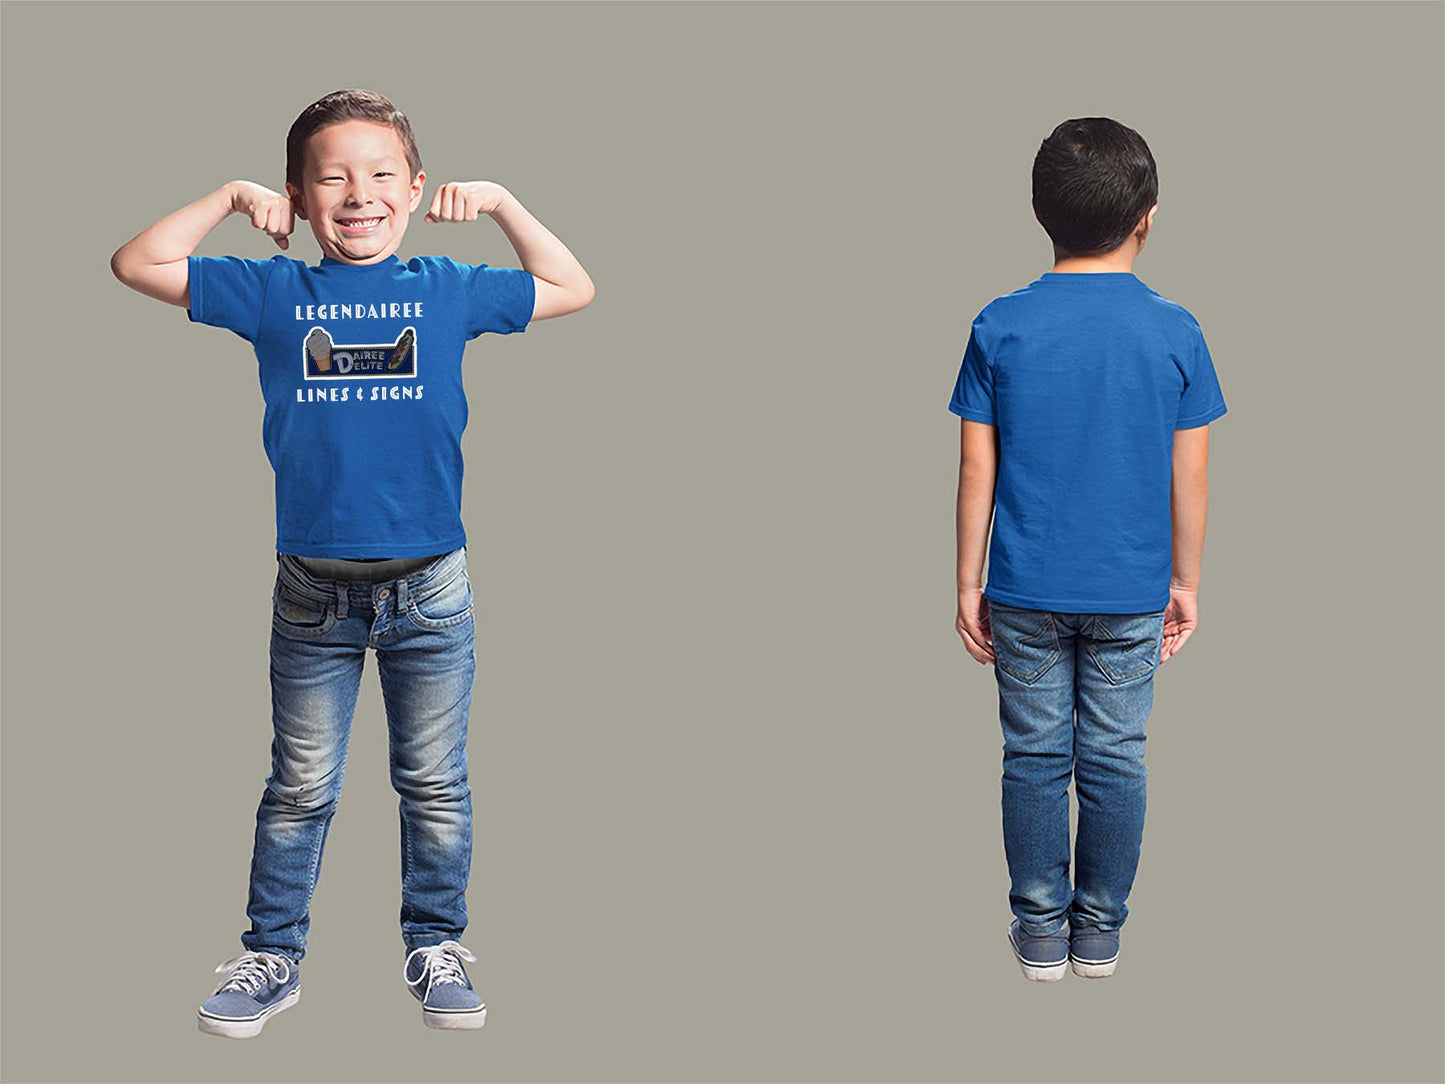 Legendairee Youth T-Shirt Youth Small Royal